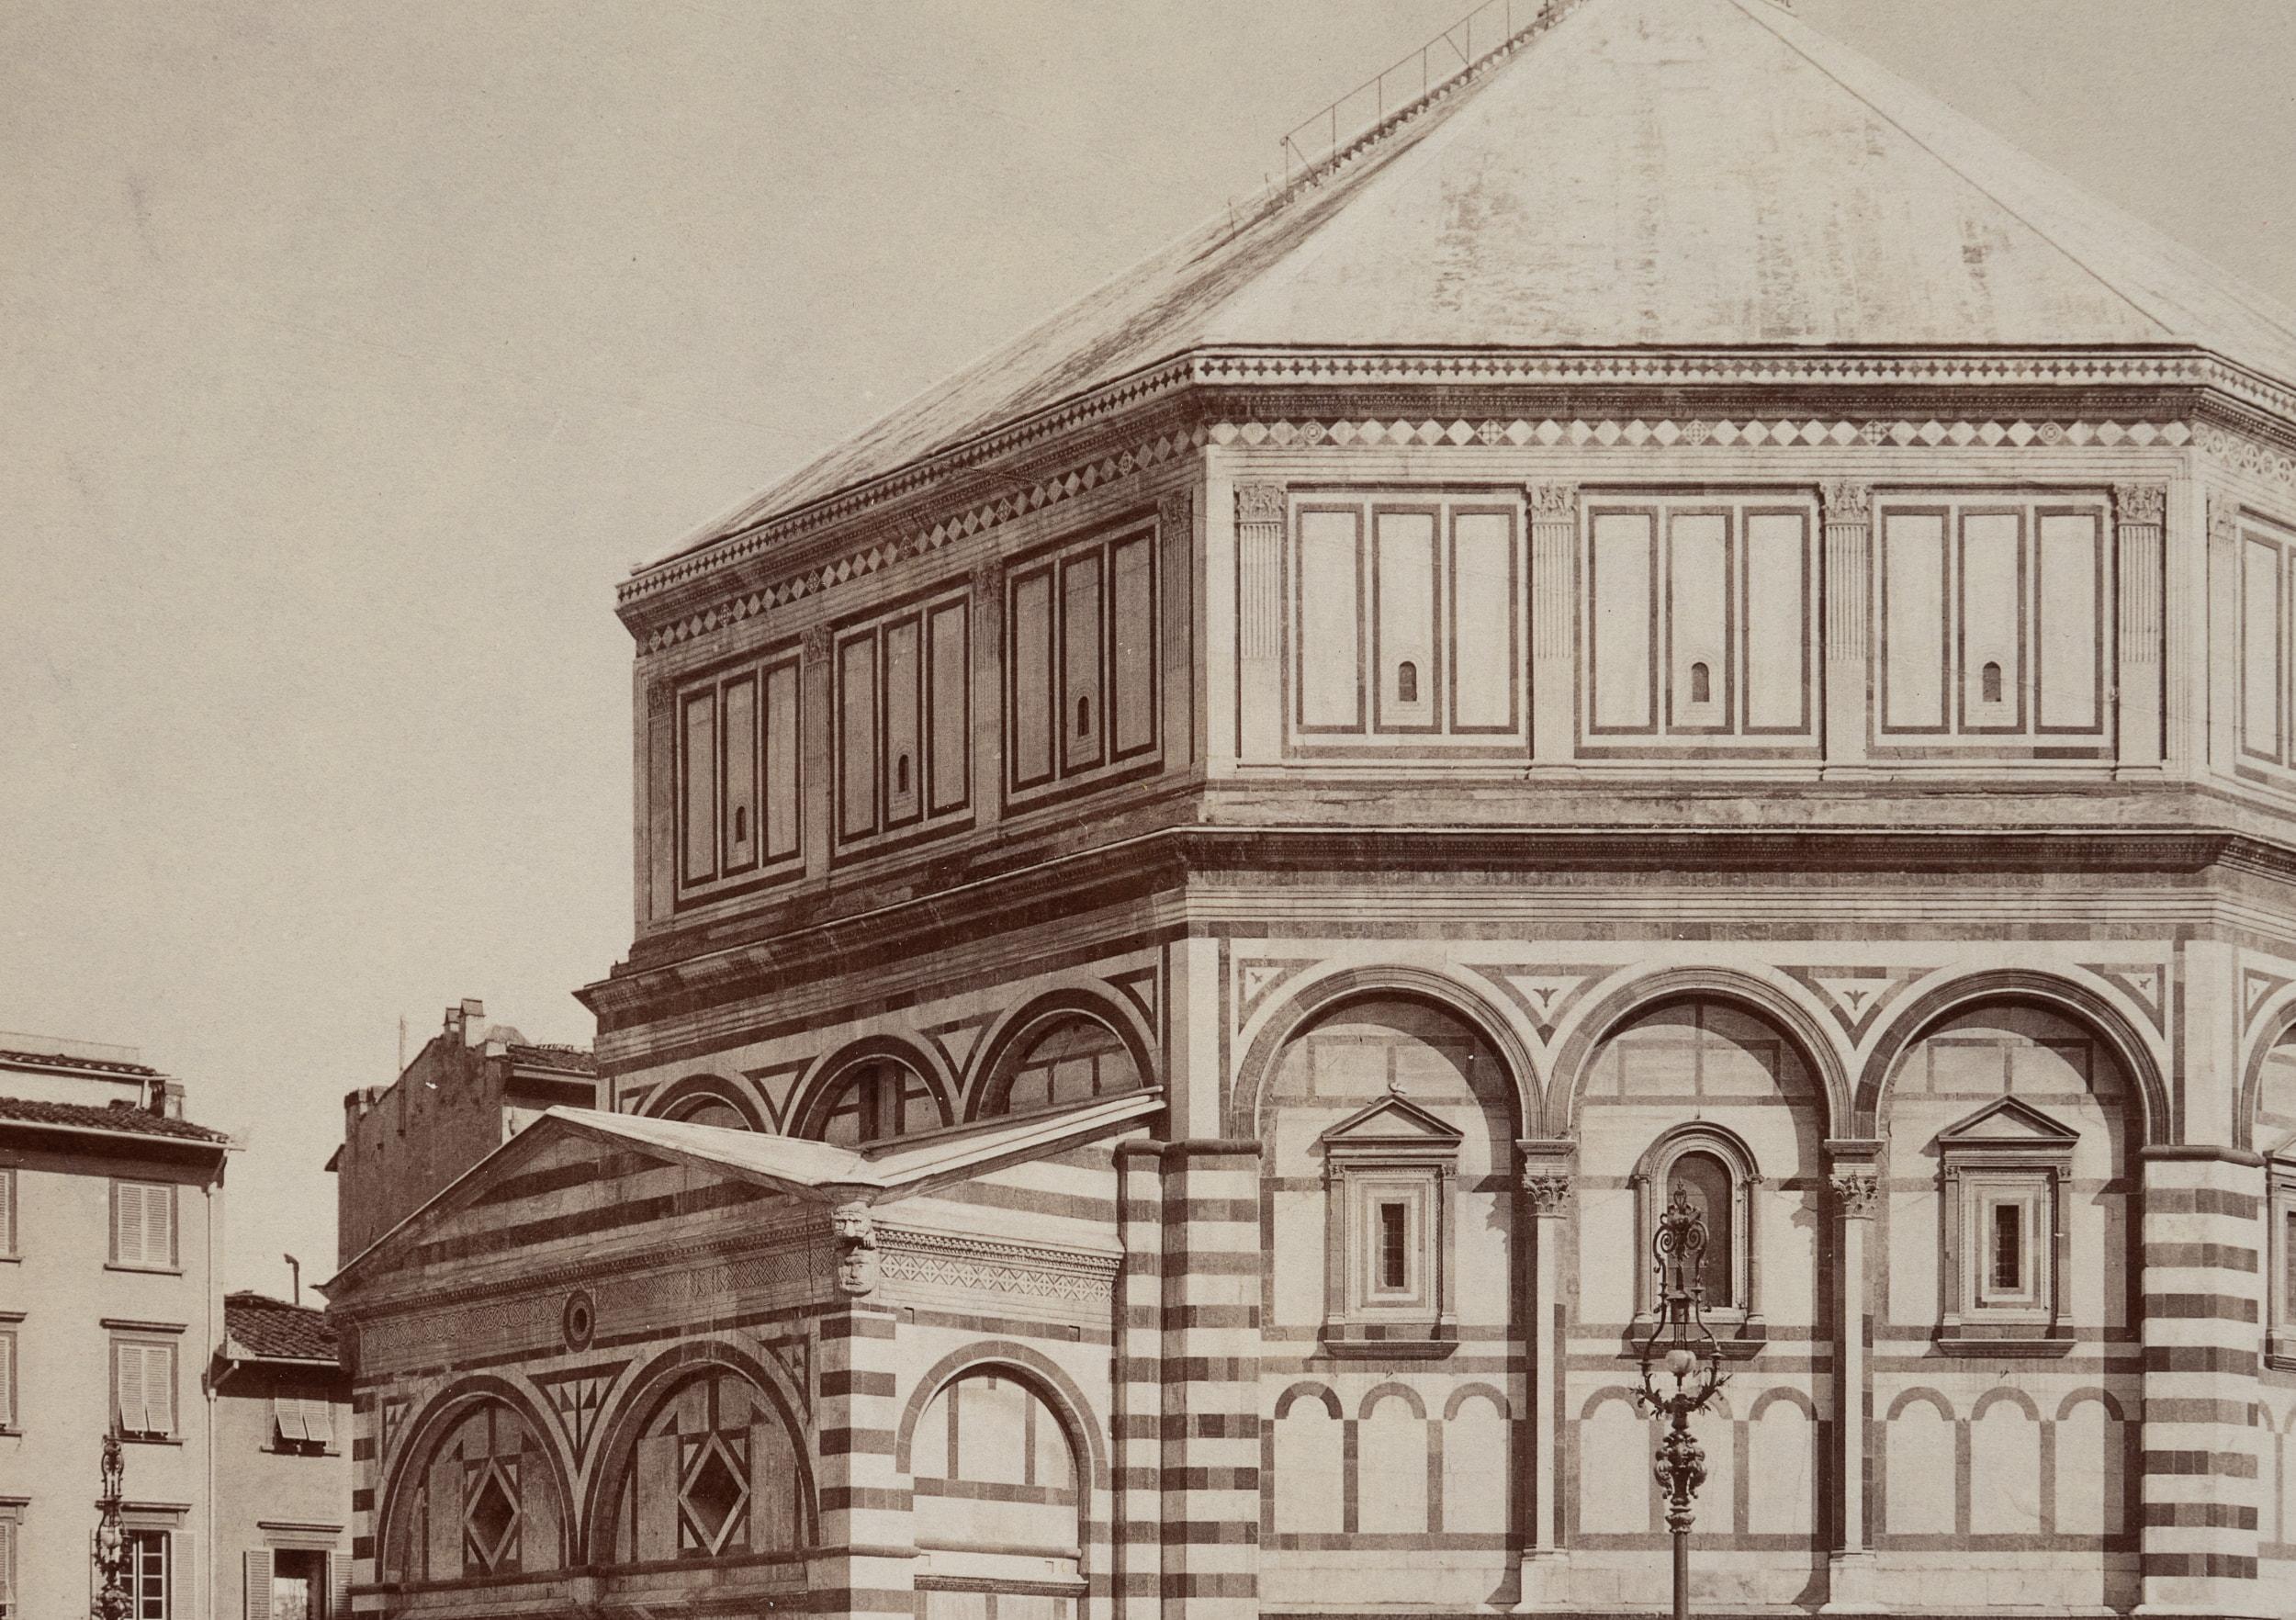 Fratelli Alinari (19th century): Architectural view of the Baptistry of San Giovanni Baptistery of the Duomo Florentine Romanesque, Florence, c. 1890, albumen paper print

Technique: albumen paper print, mounted on Albumen paper

Inscription: Lower